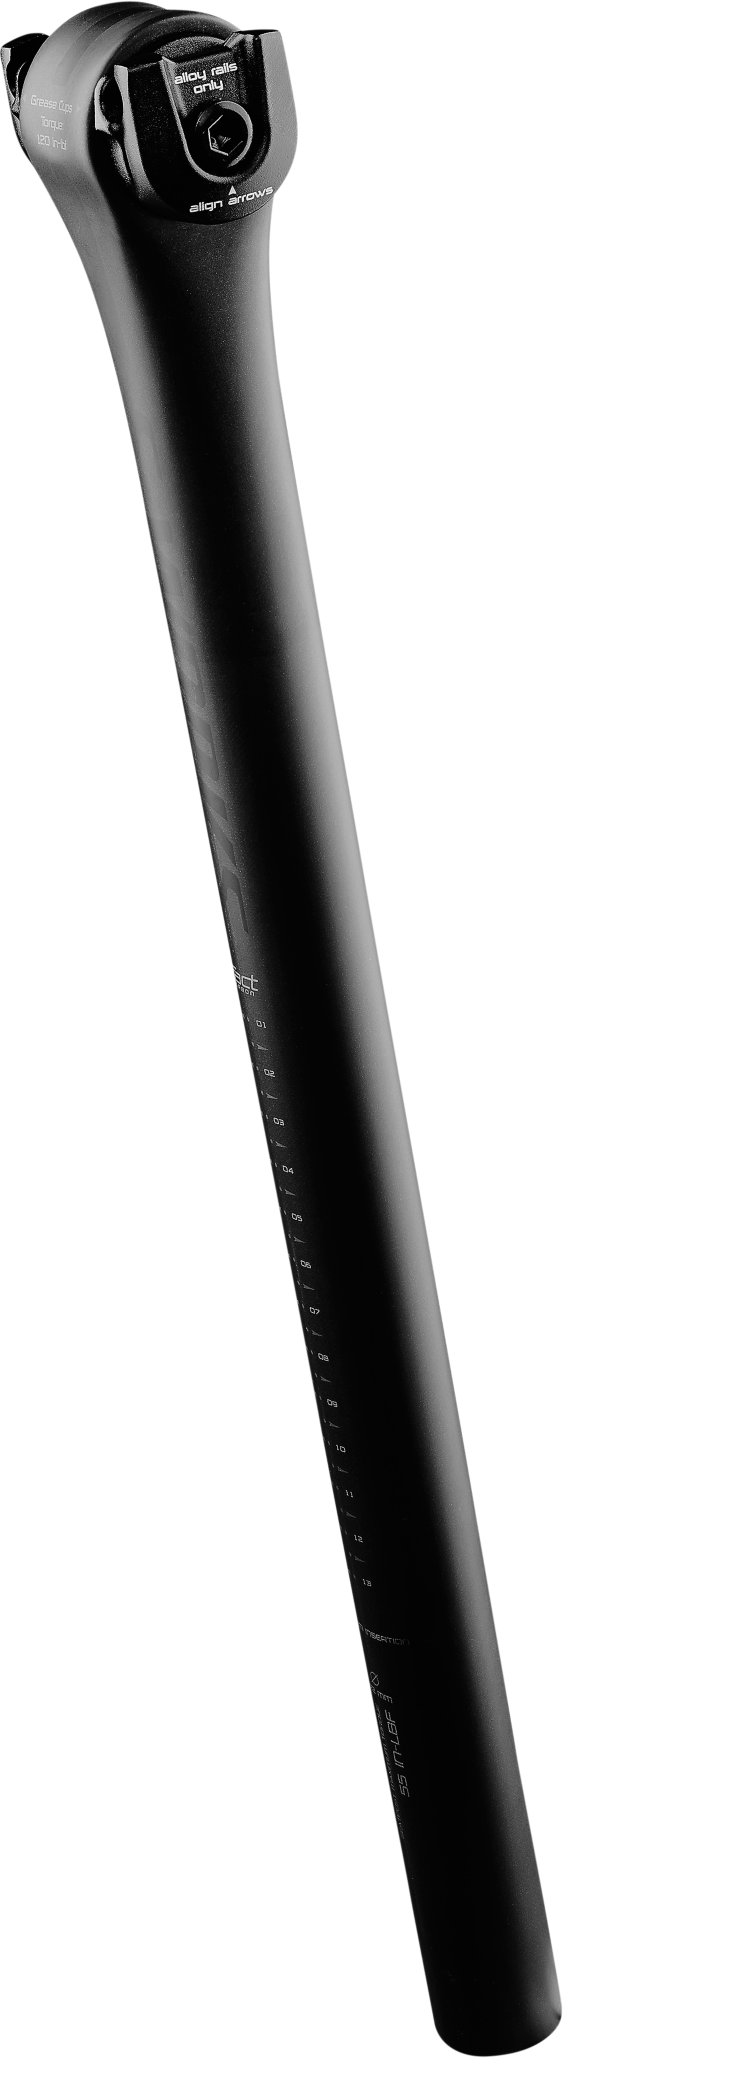 Specialized S Works Seatpost Discount, 52% OFF | www 